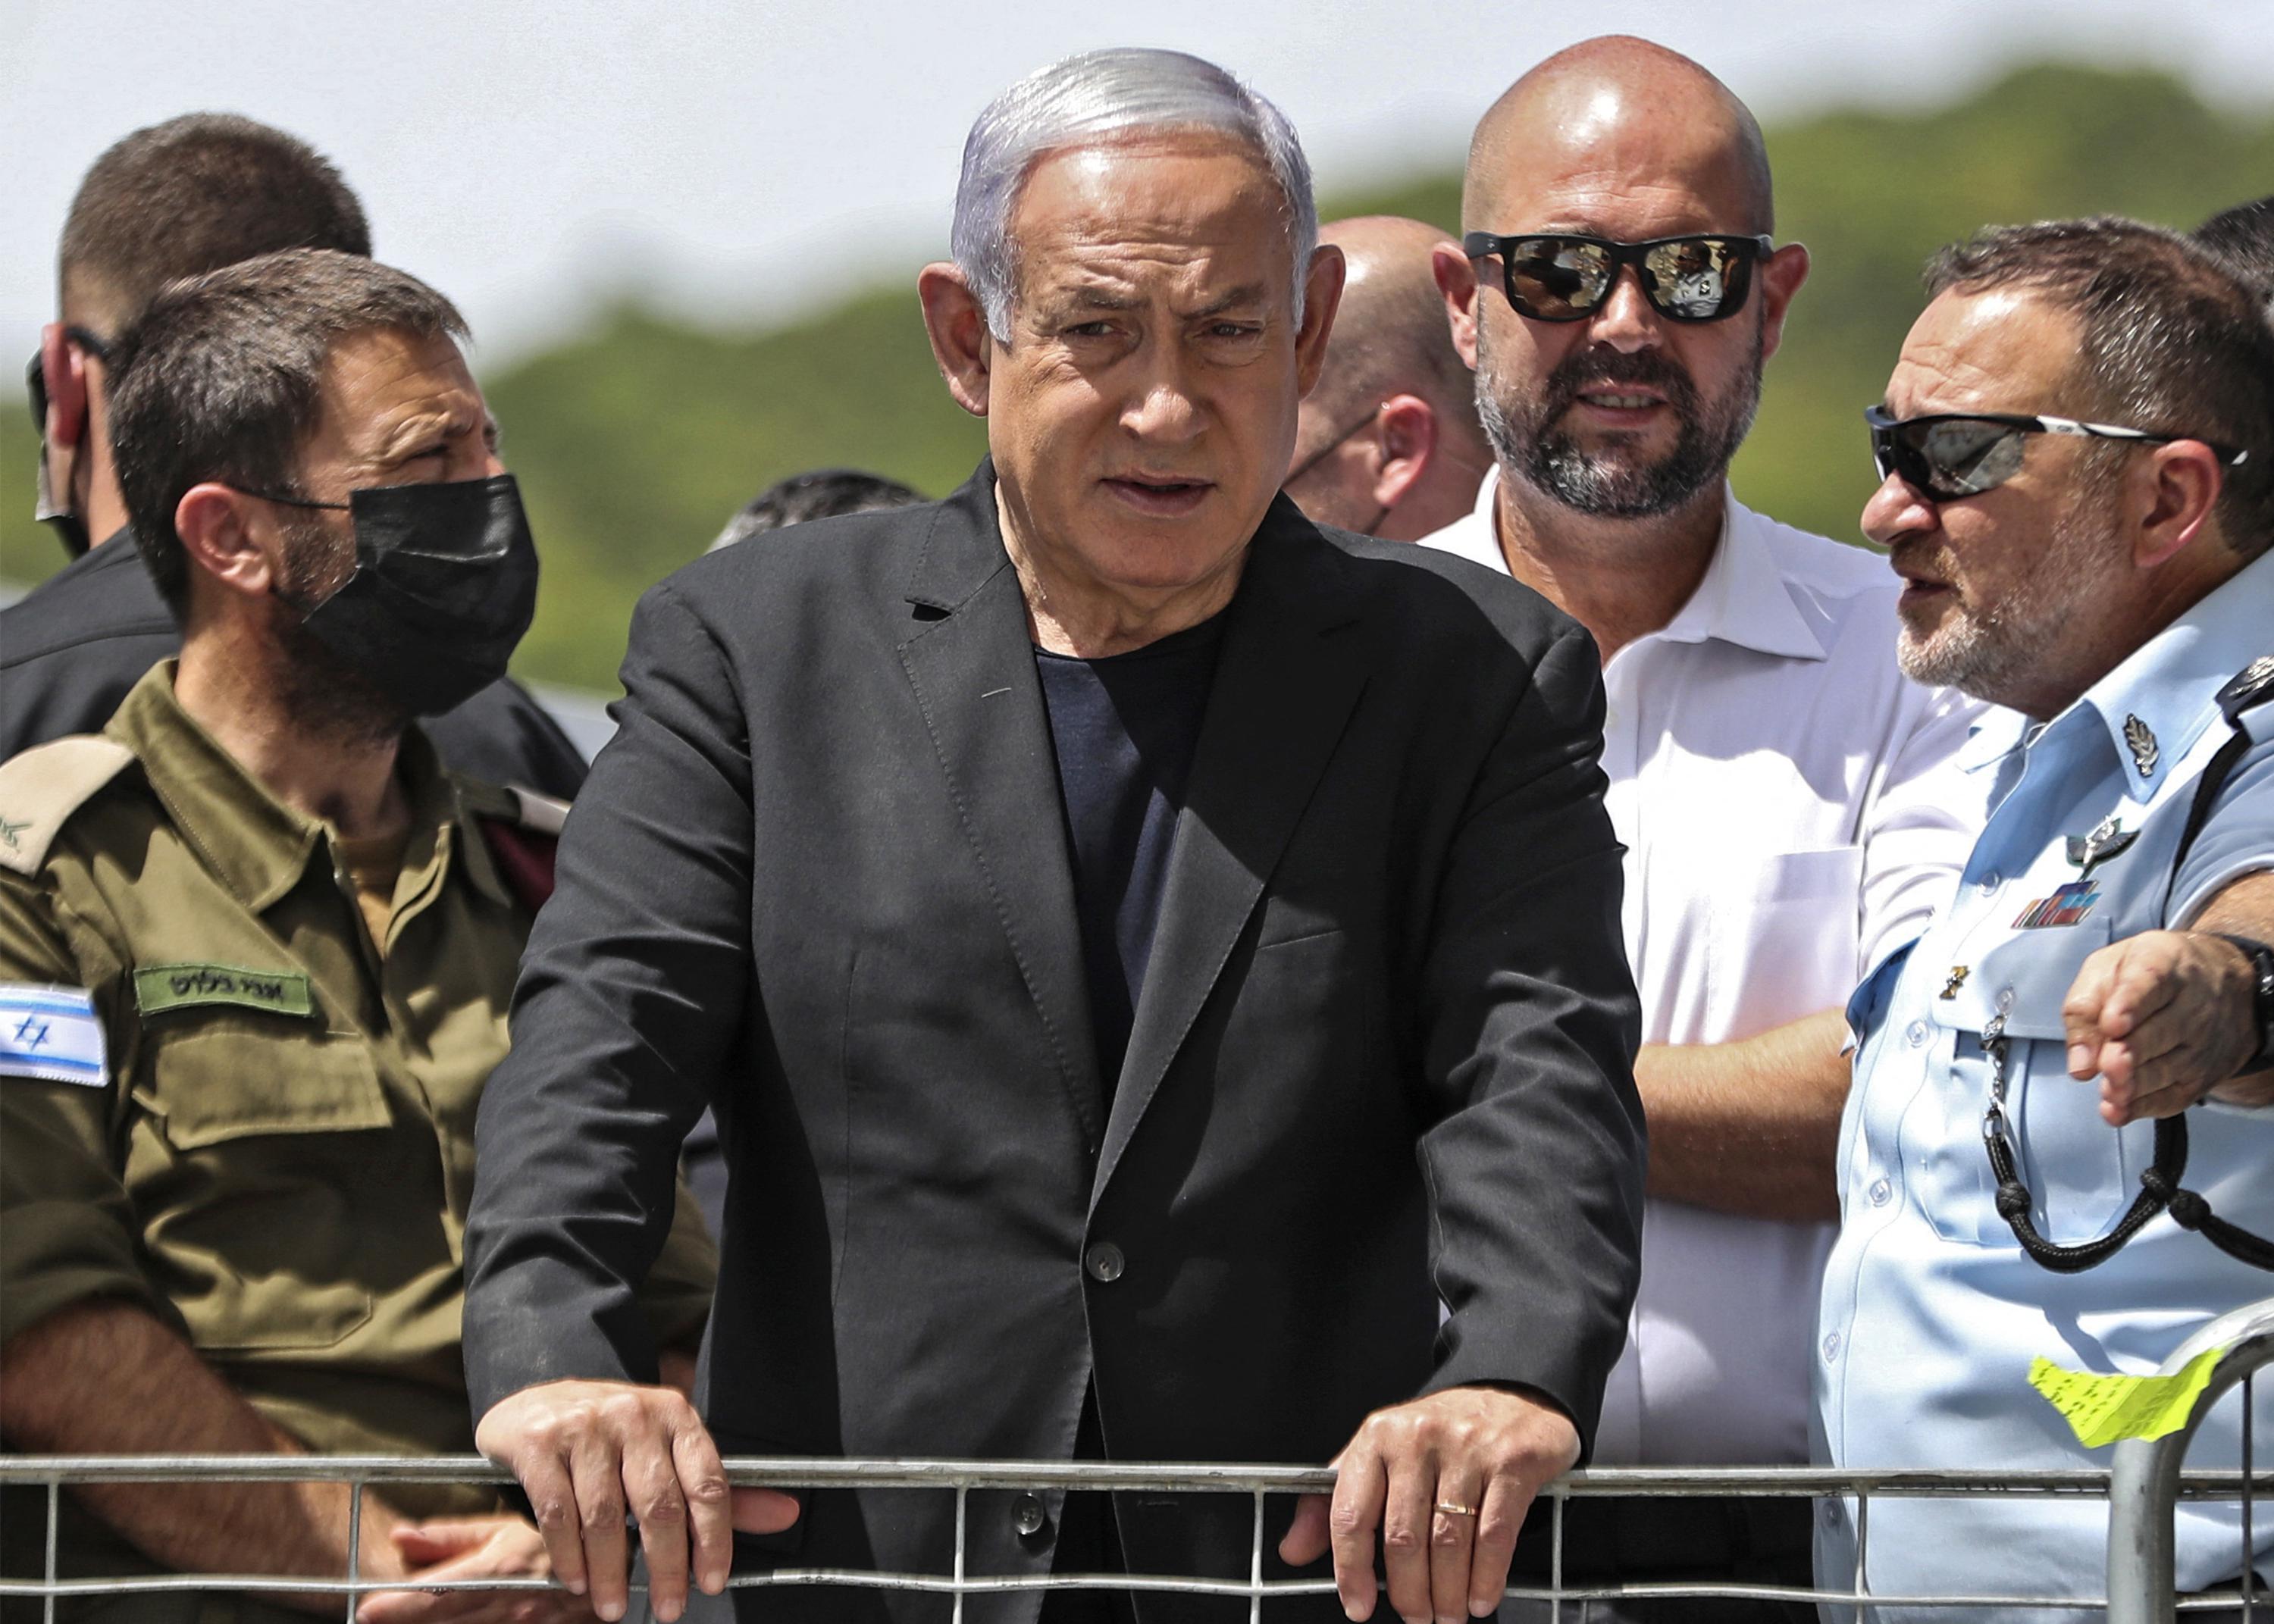 Israeli Prime Minister Netanyahu launches attack on Hamas as new conflict erupts in Gaza today